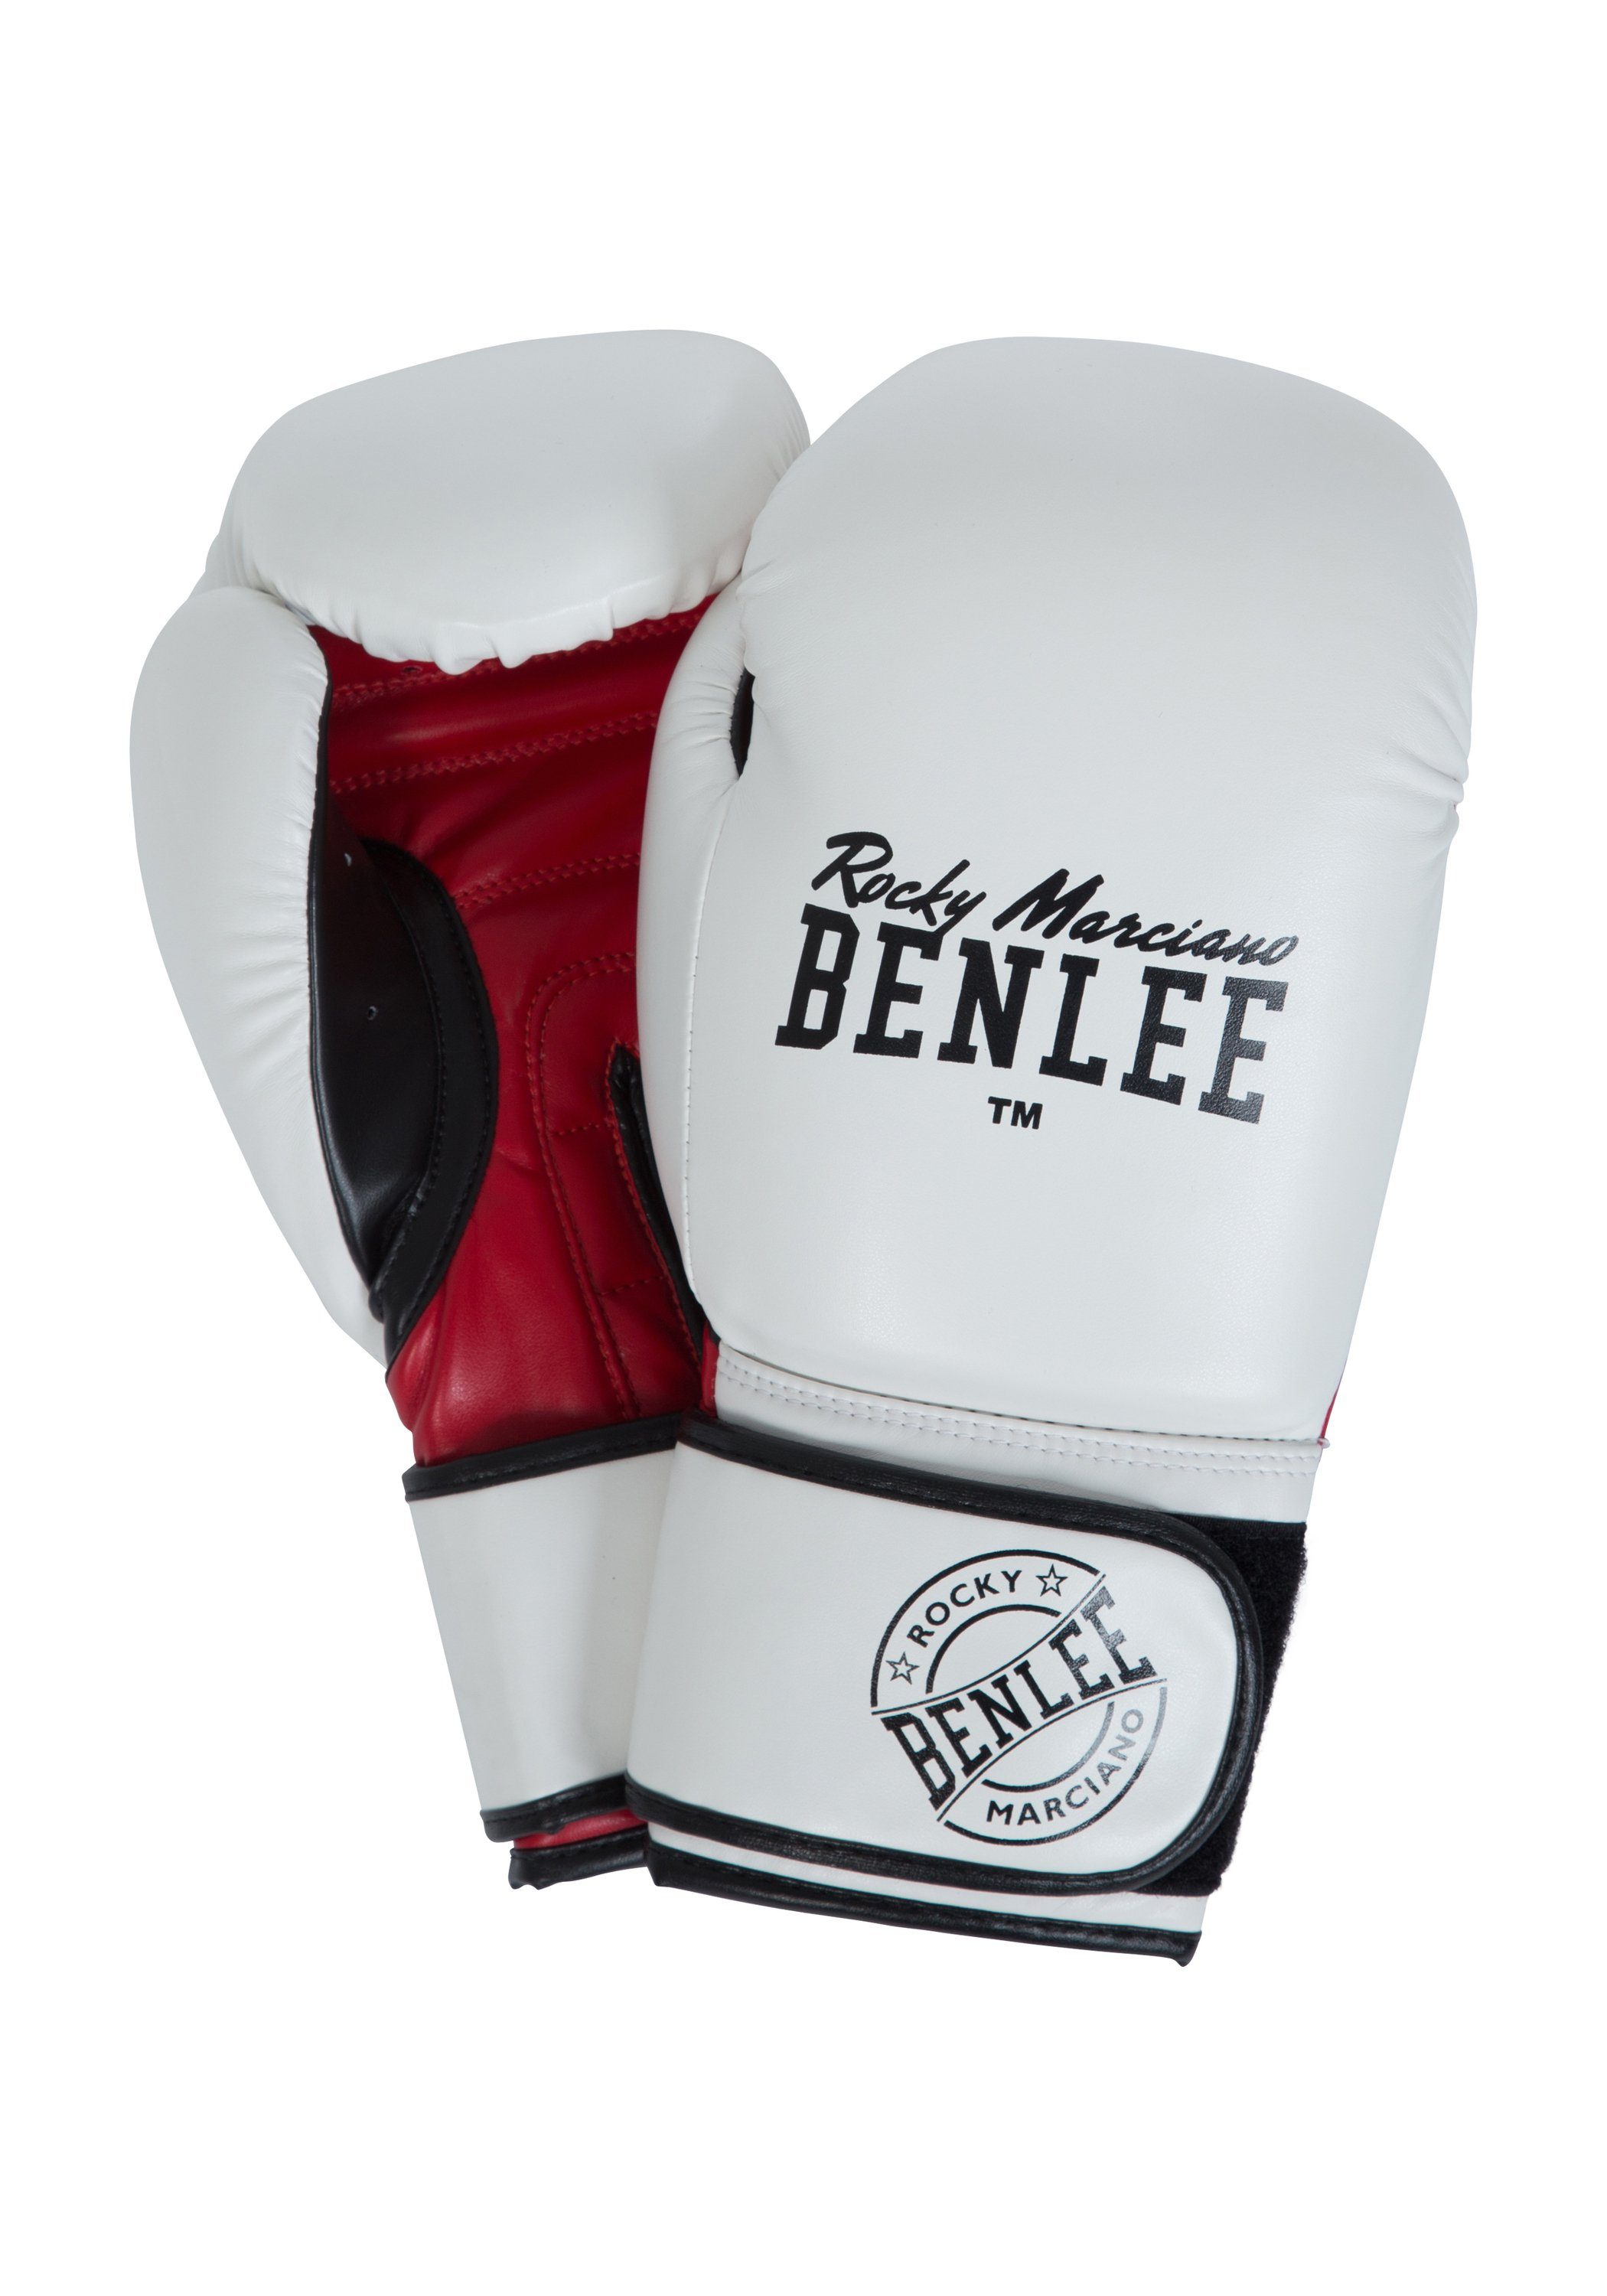 Benlee CARLOS White/Black/Red Boxhandschuhe Marciano Rocky